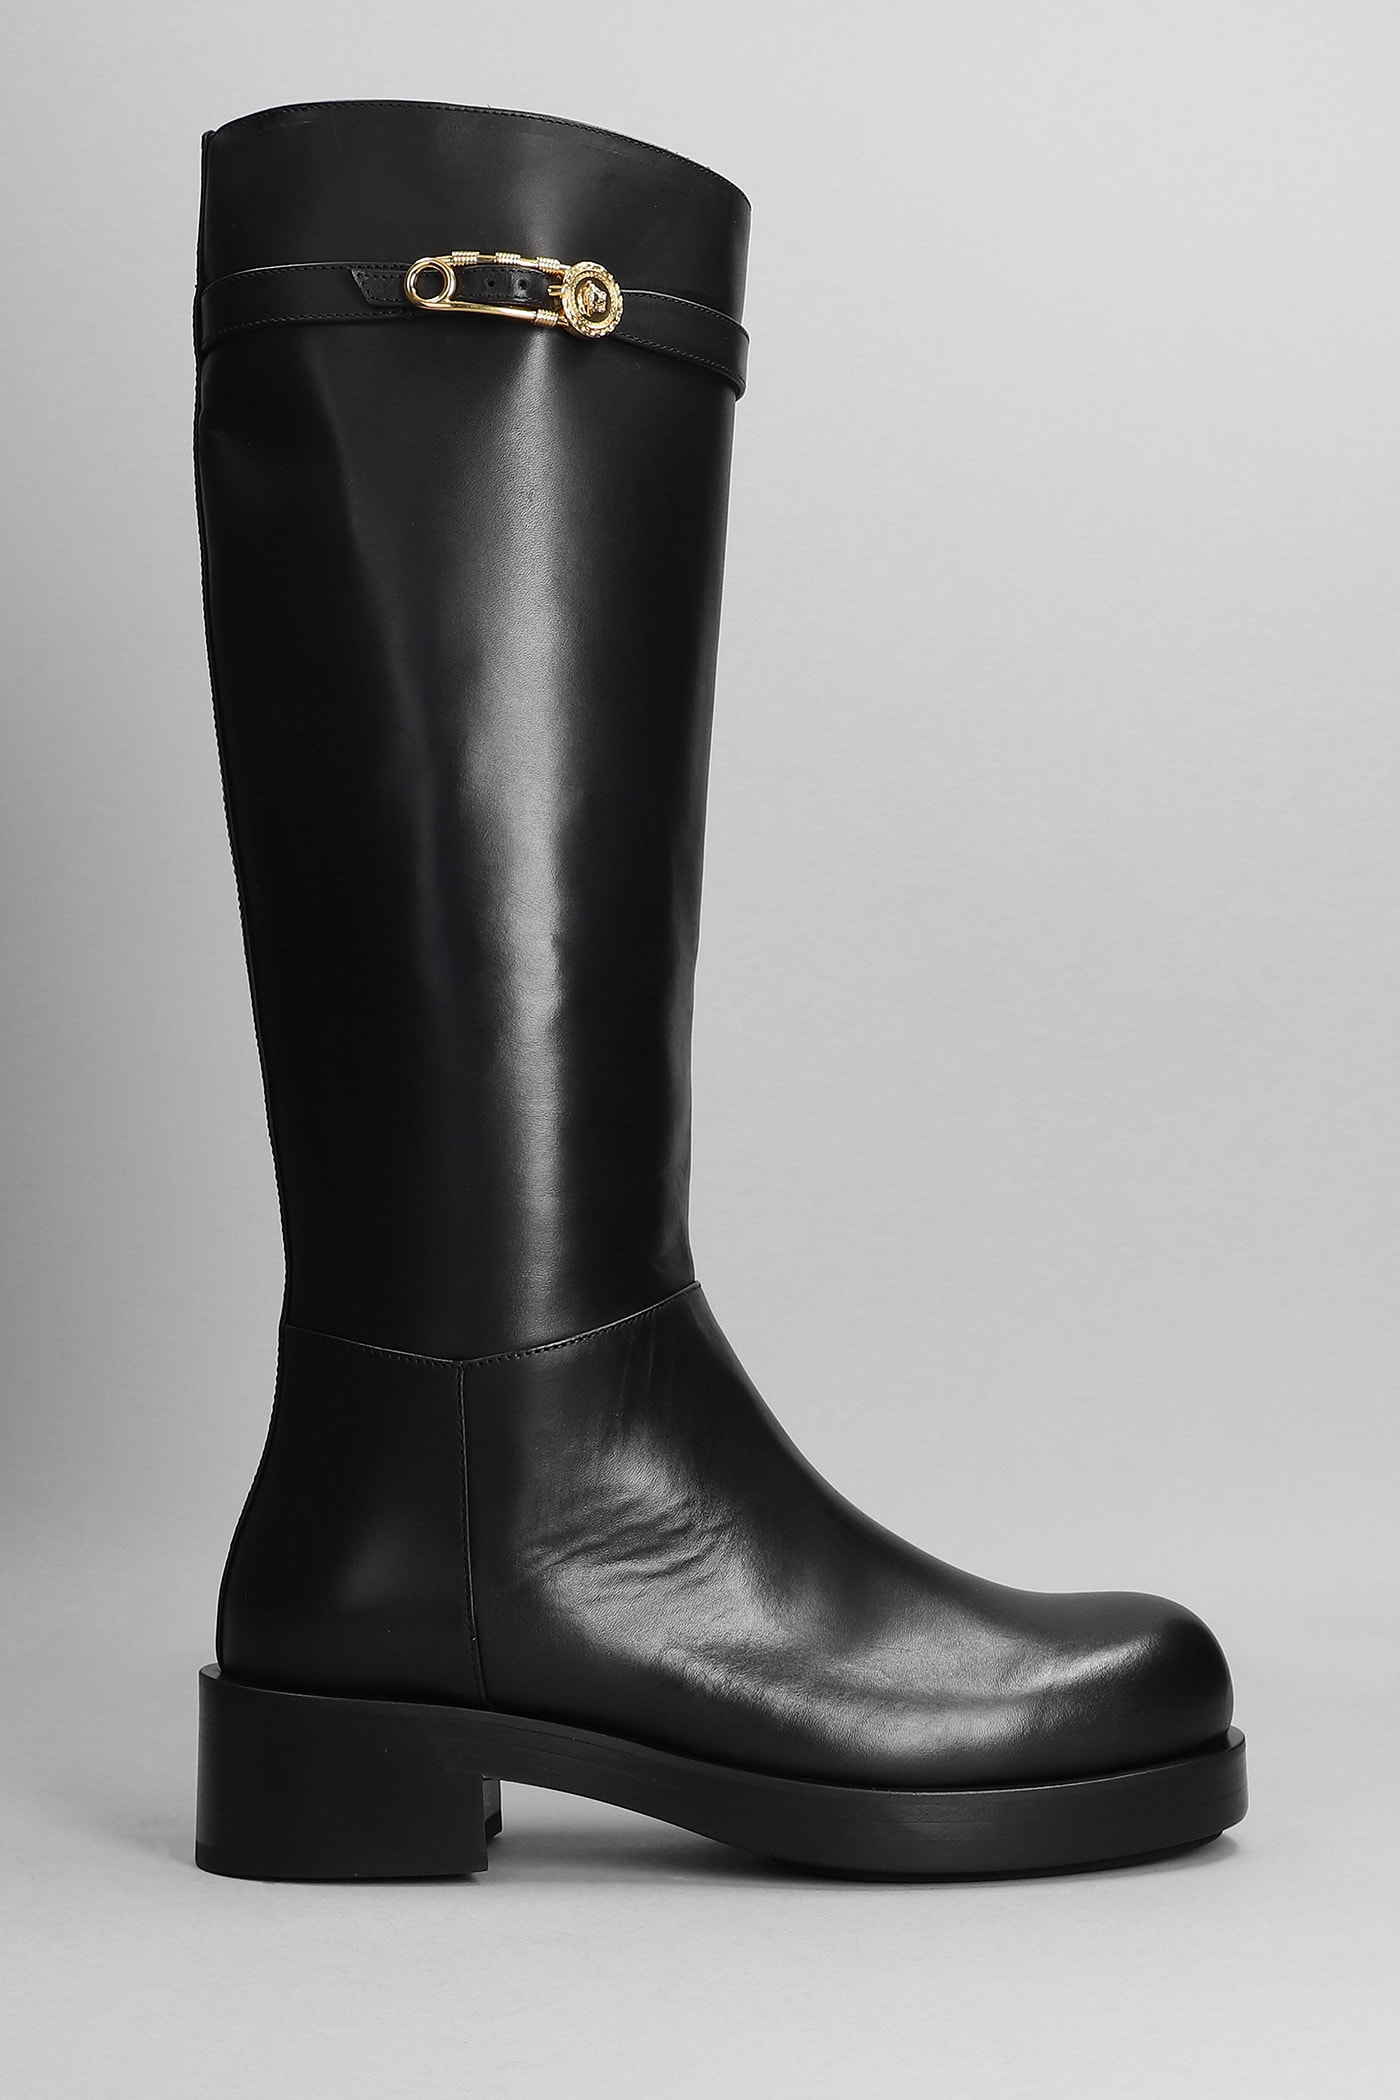 VERSACE SAFETY PINI LOW HEELS BOOTS IN BLACK LEATHER